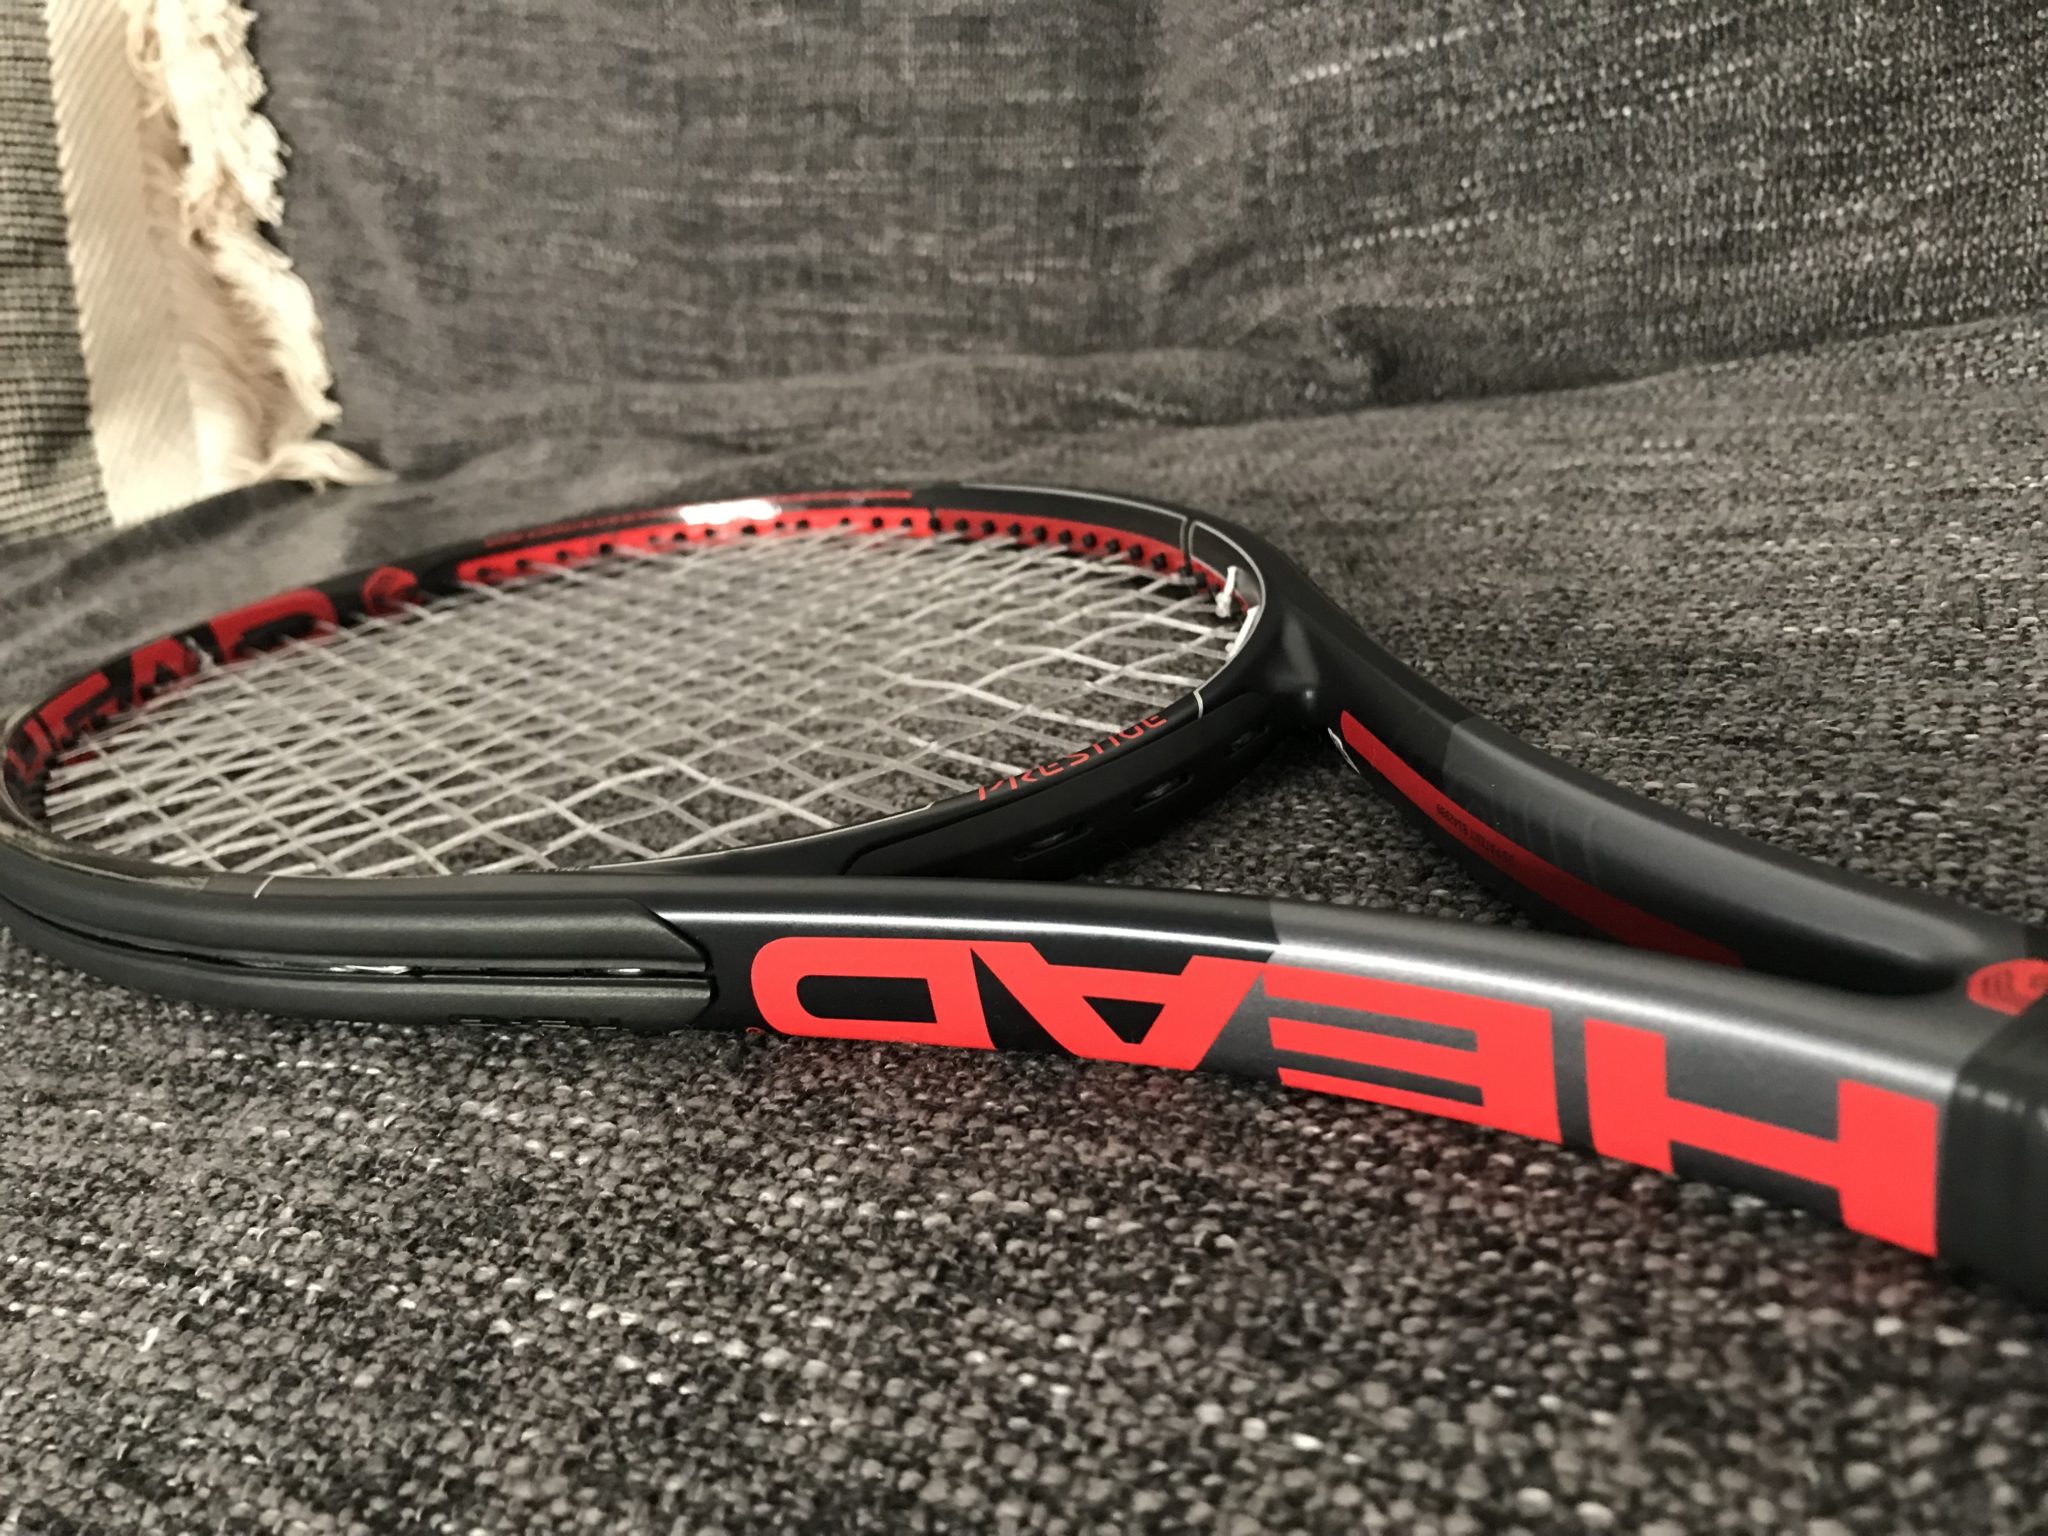 STRUNG with Cover HEAD 2017 Graphene Touch Speed S Tennis Racquet